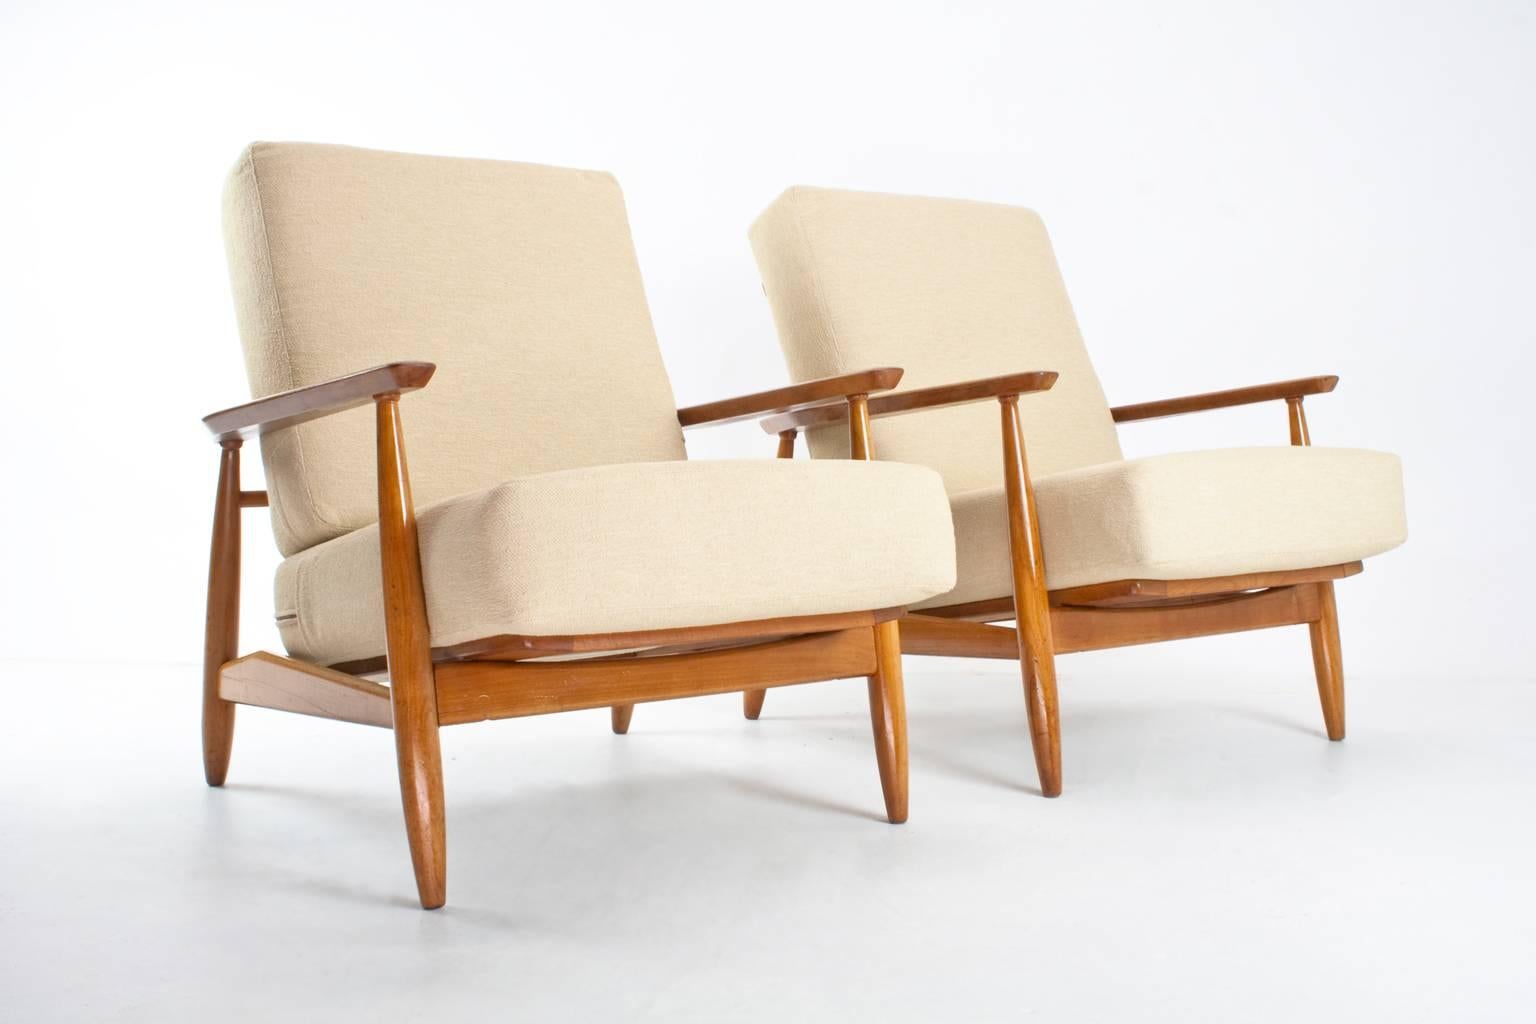 Pair of Danish modern lounge set. We have a total of four pieces in stock. The presented items are upholstered in a good quality off white De Ploeg (NL) fabric.

Fantastic condition lounge chairs, in the manner of Kofod Larsen, Hans Olsen, Arne